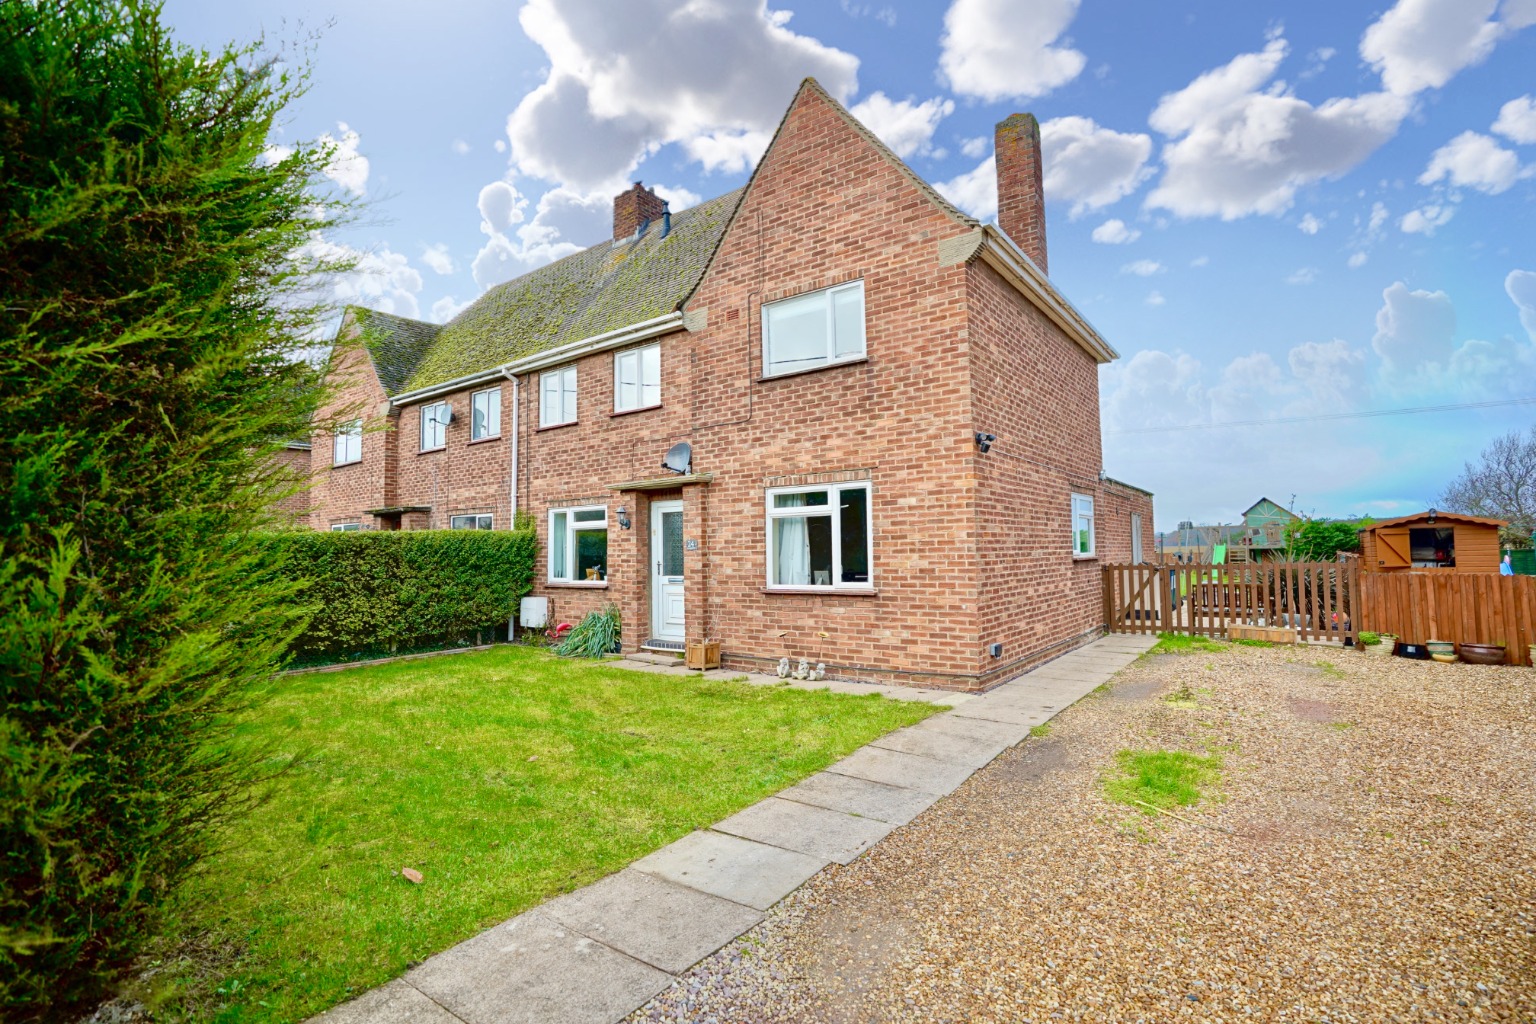 3 bed semi-detached house for sale in Coronation Avenue, Huntingdon - Property Image 1